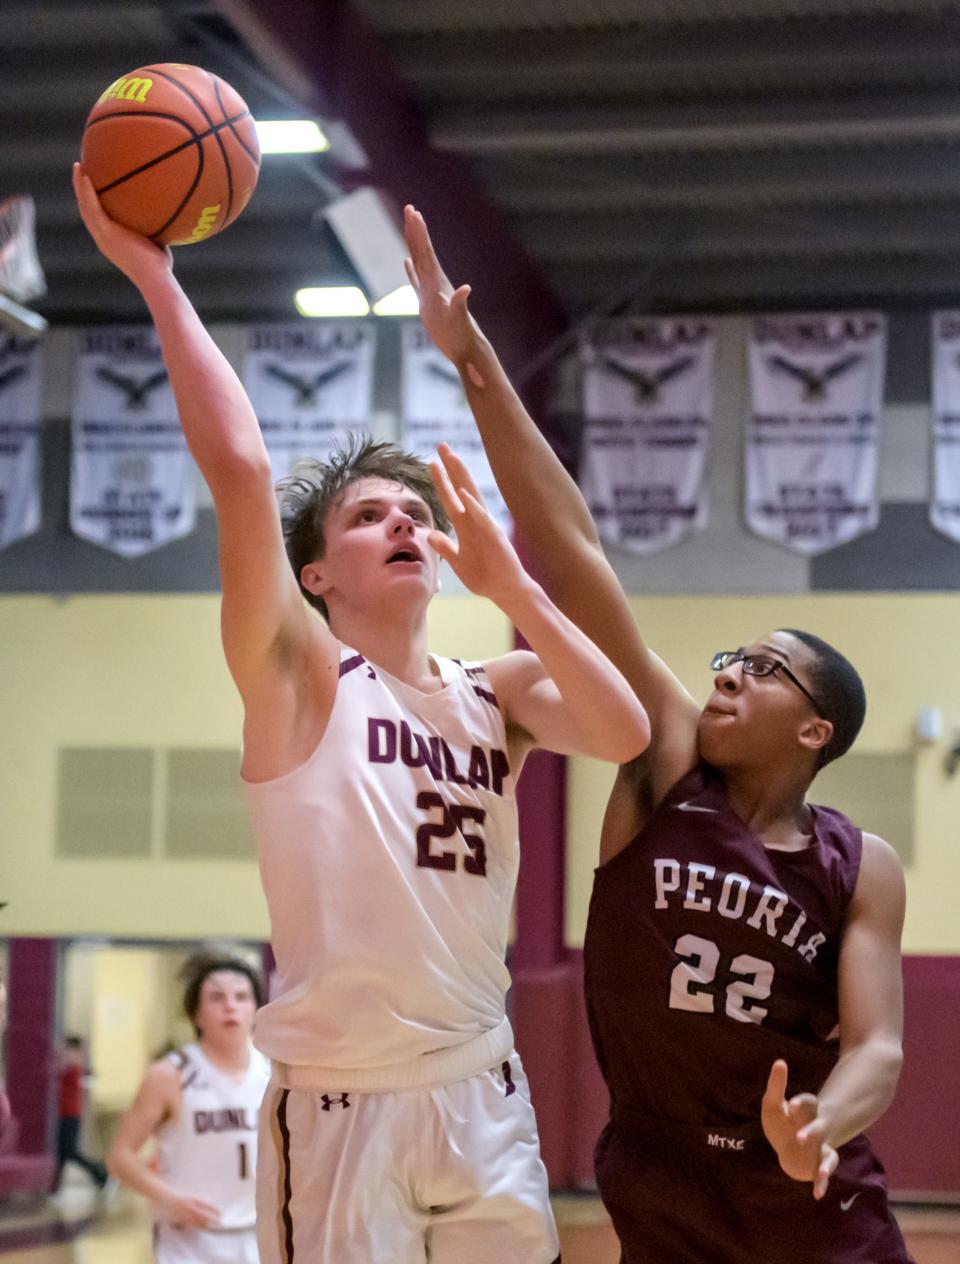 Dunlap's Mack Sutter (25) shoots over Peoria High's Deronnie Pearson in the second half Tuesday, Jan. 17, 2023 at Dunlap High School. The Lions defeated the Eagles 71-46.